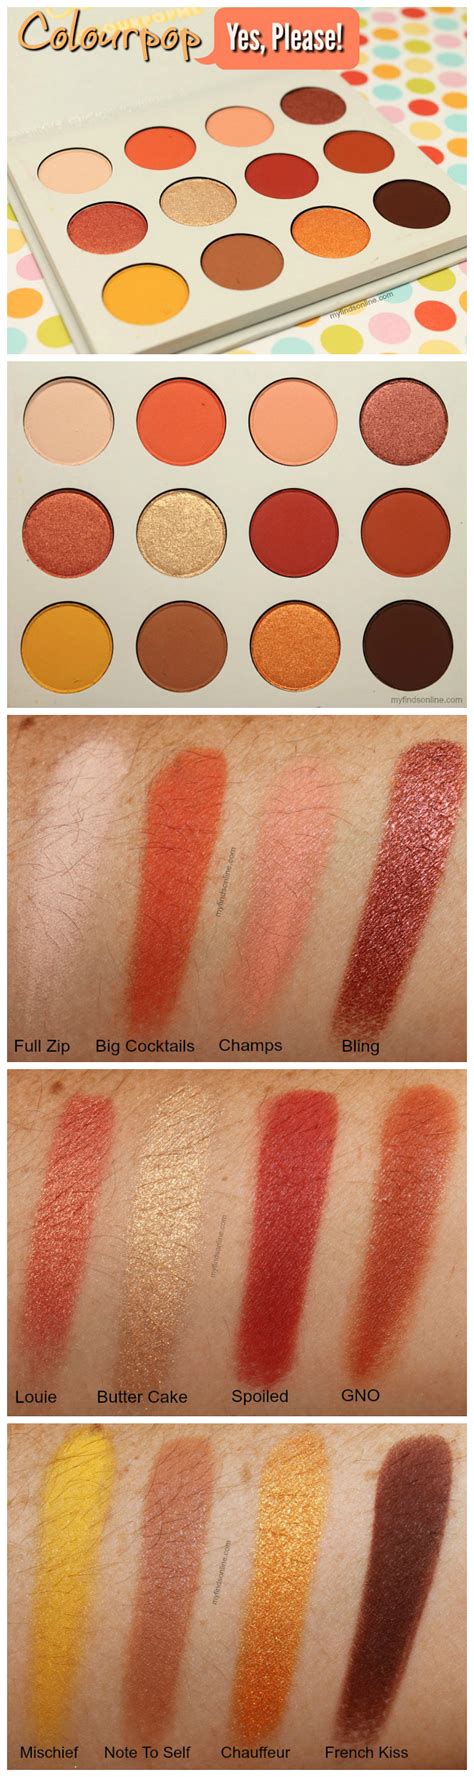 colourpop yes please eyeshadow palette review and swatches